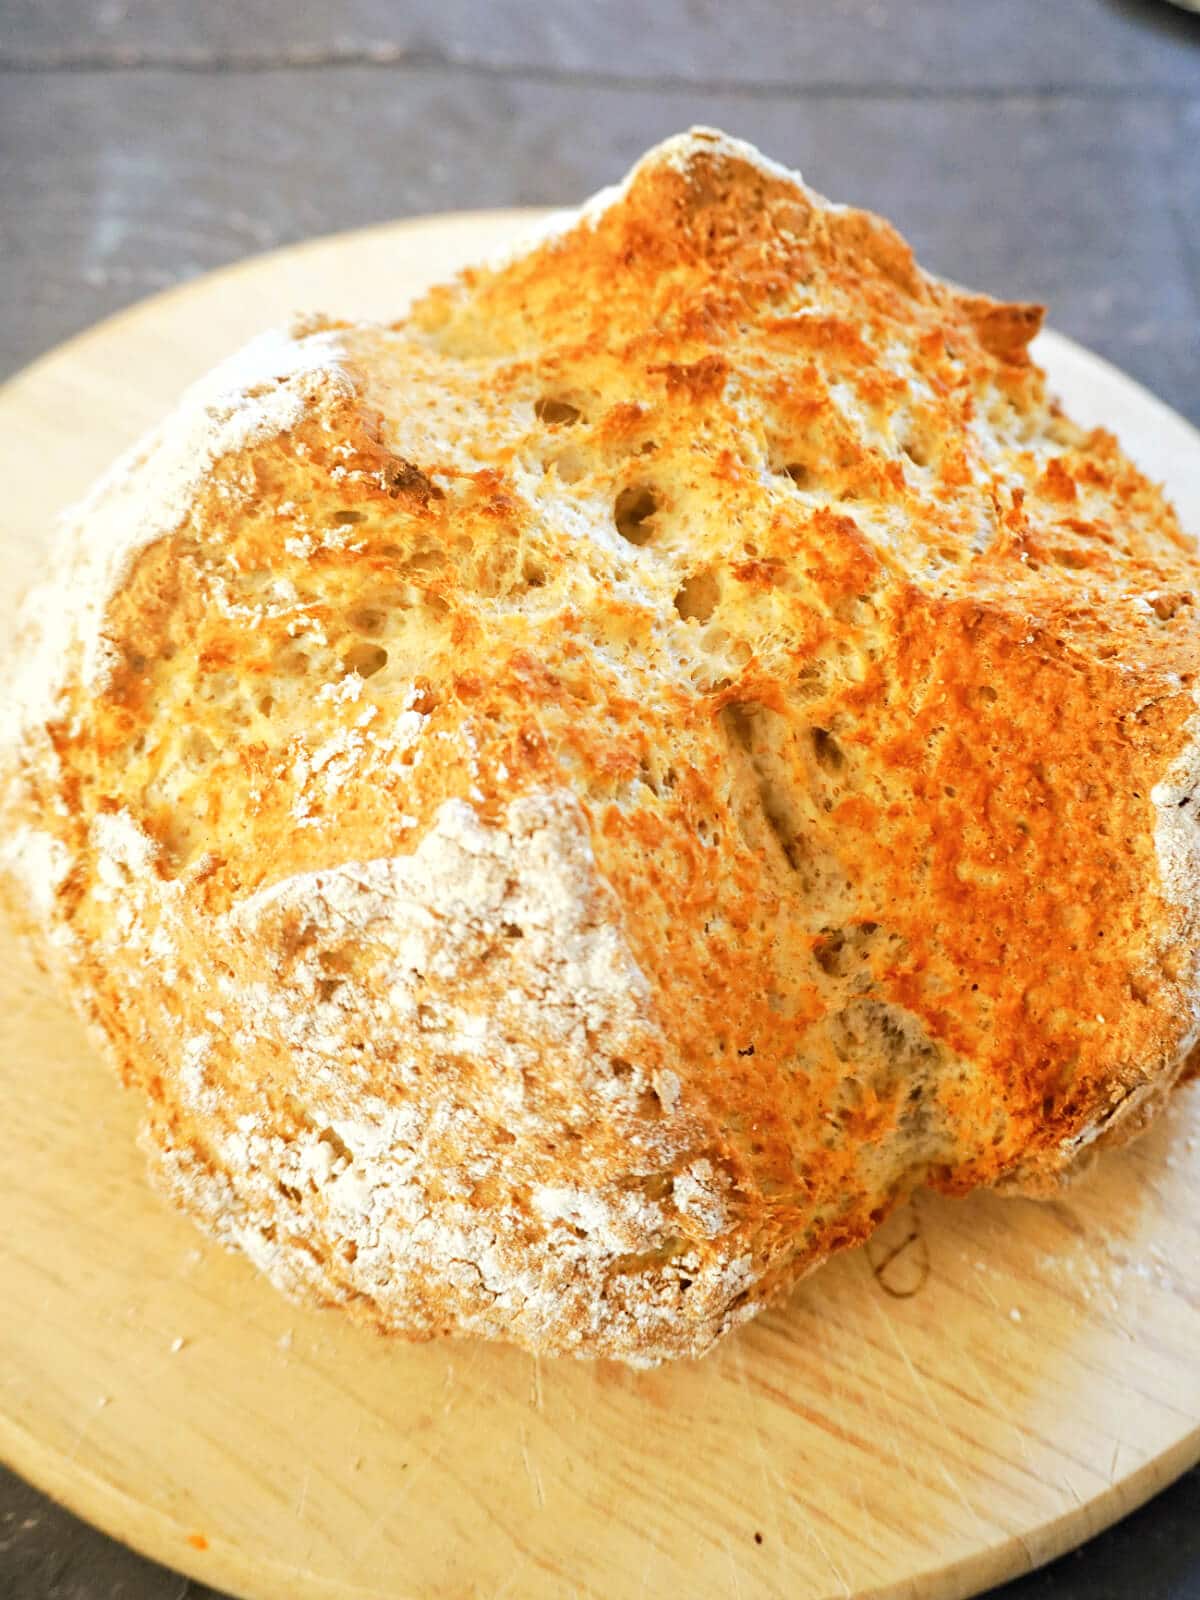 Close-up shot of a soda bread on a wooden board